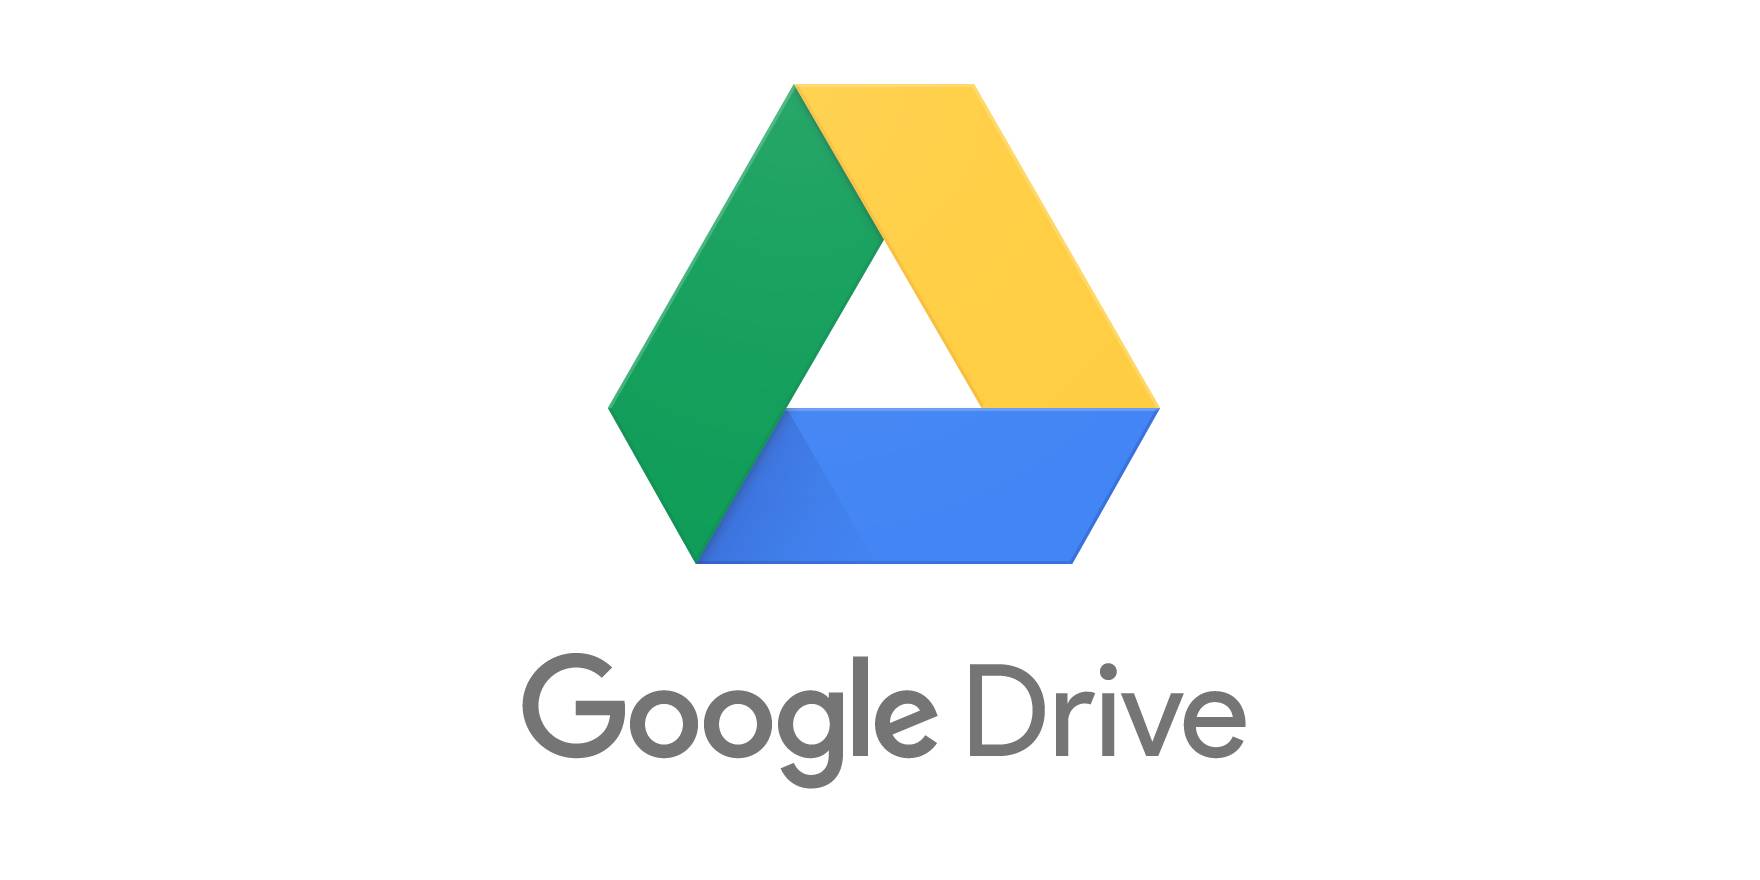 It's not just you, Google Drive is down for some today - 9to5Google